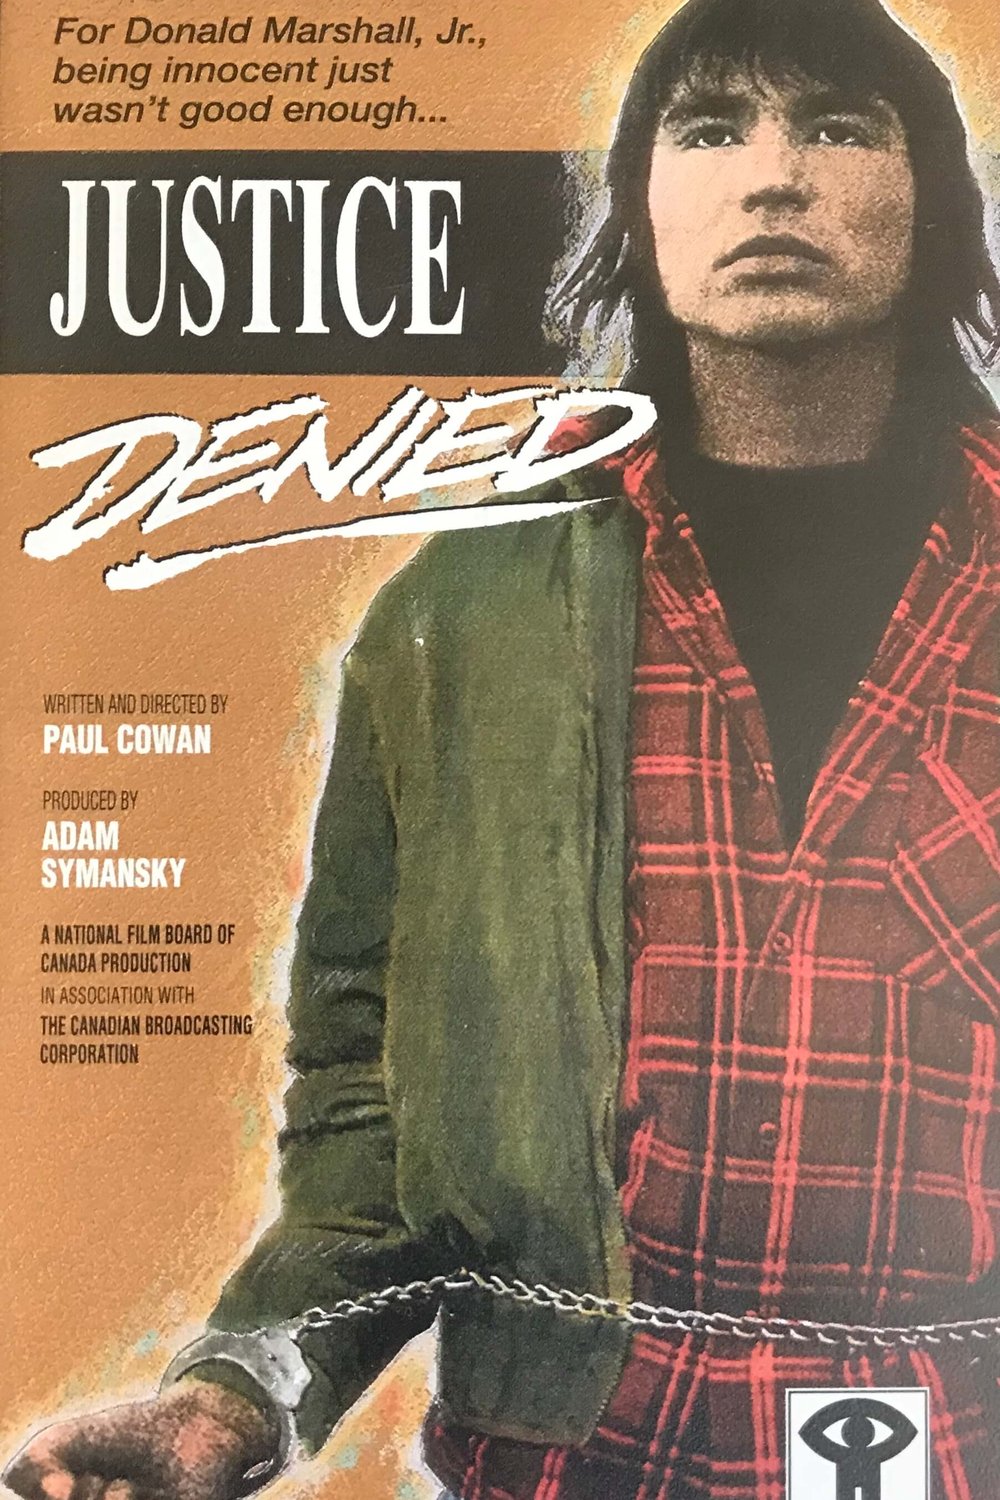 Poster of the movie Justice Denied